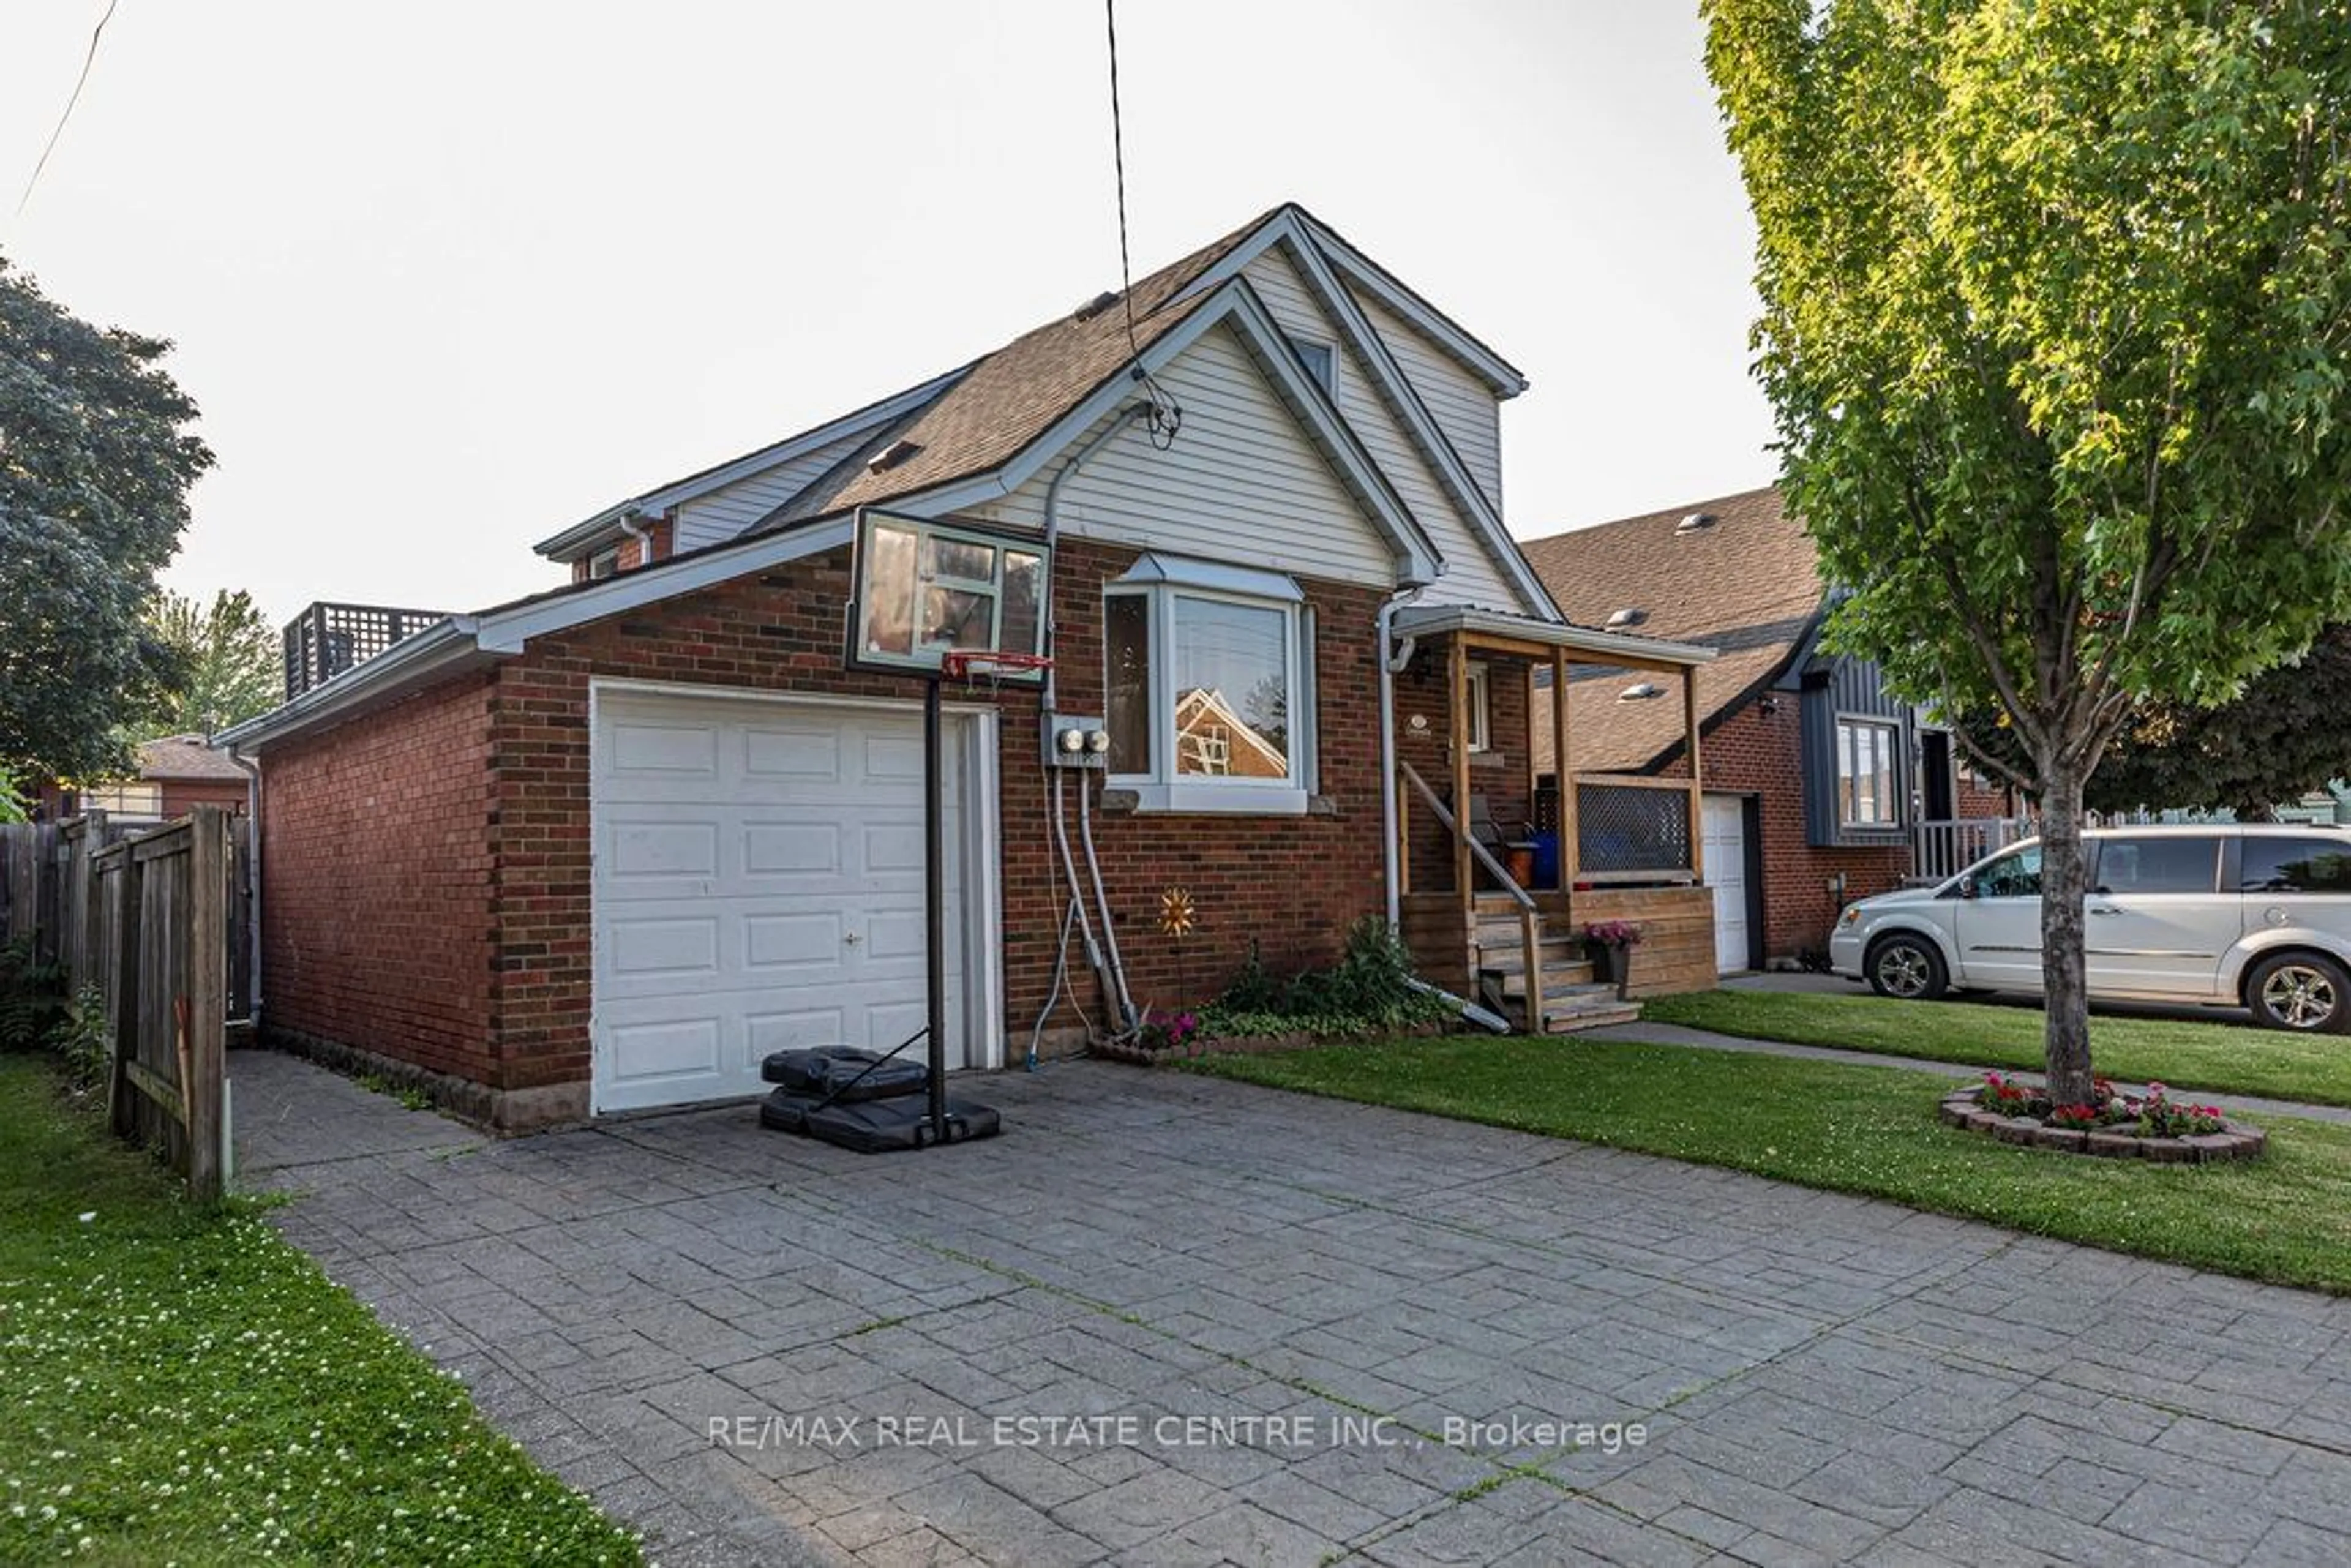 Frontside or backside of a home for 222 Craigroyston Rd, Hamilton Ontario L8K 3K4